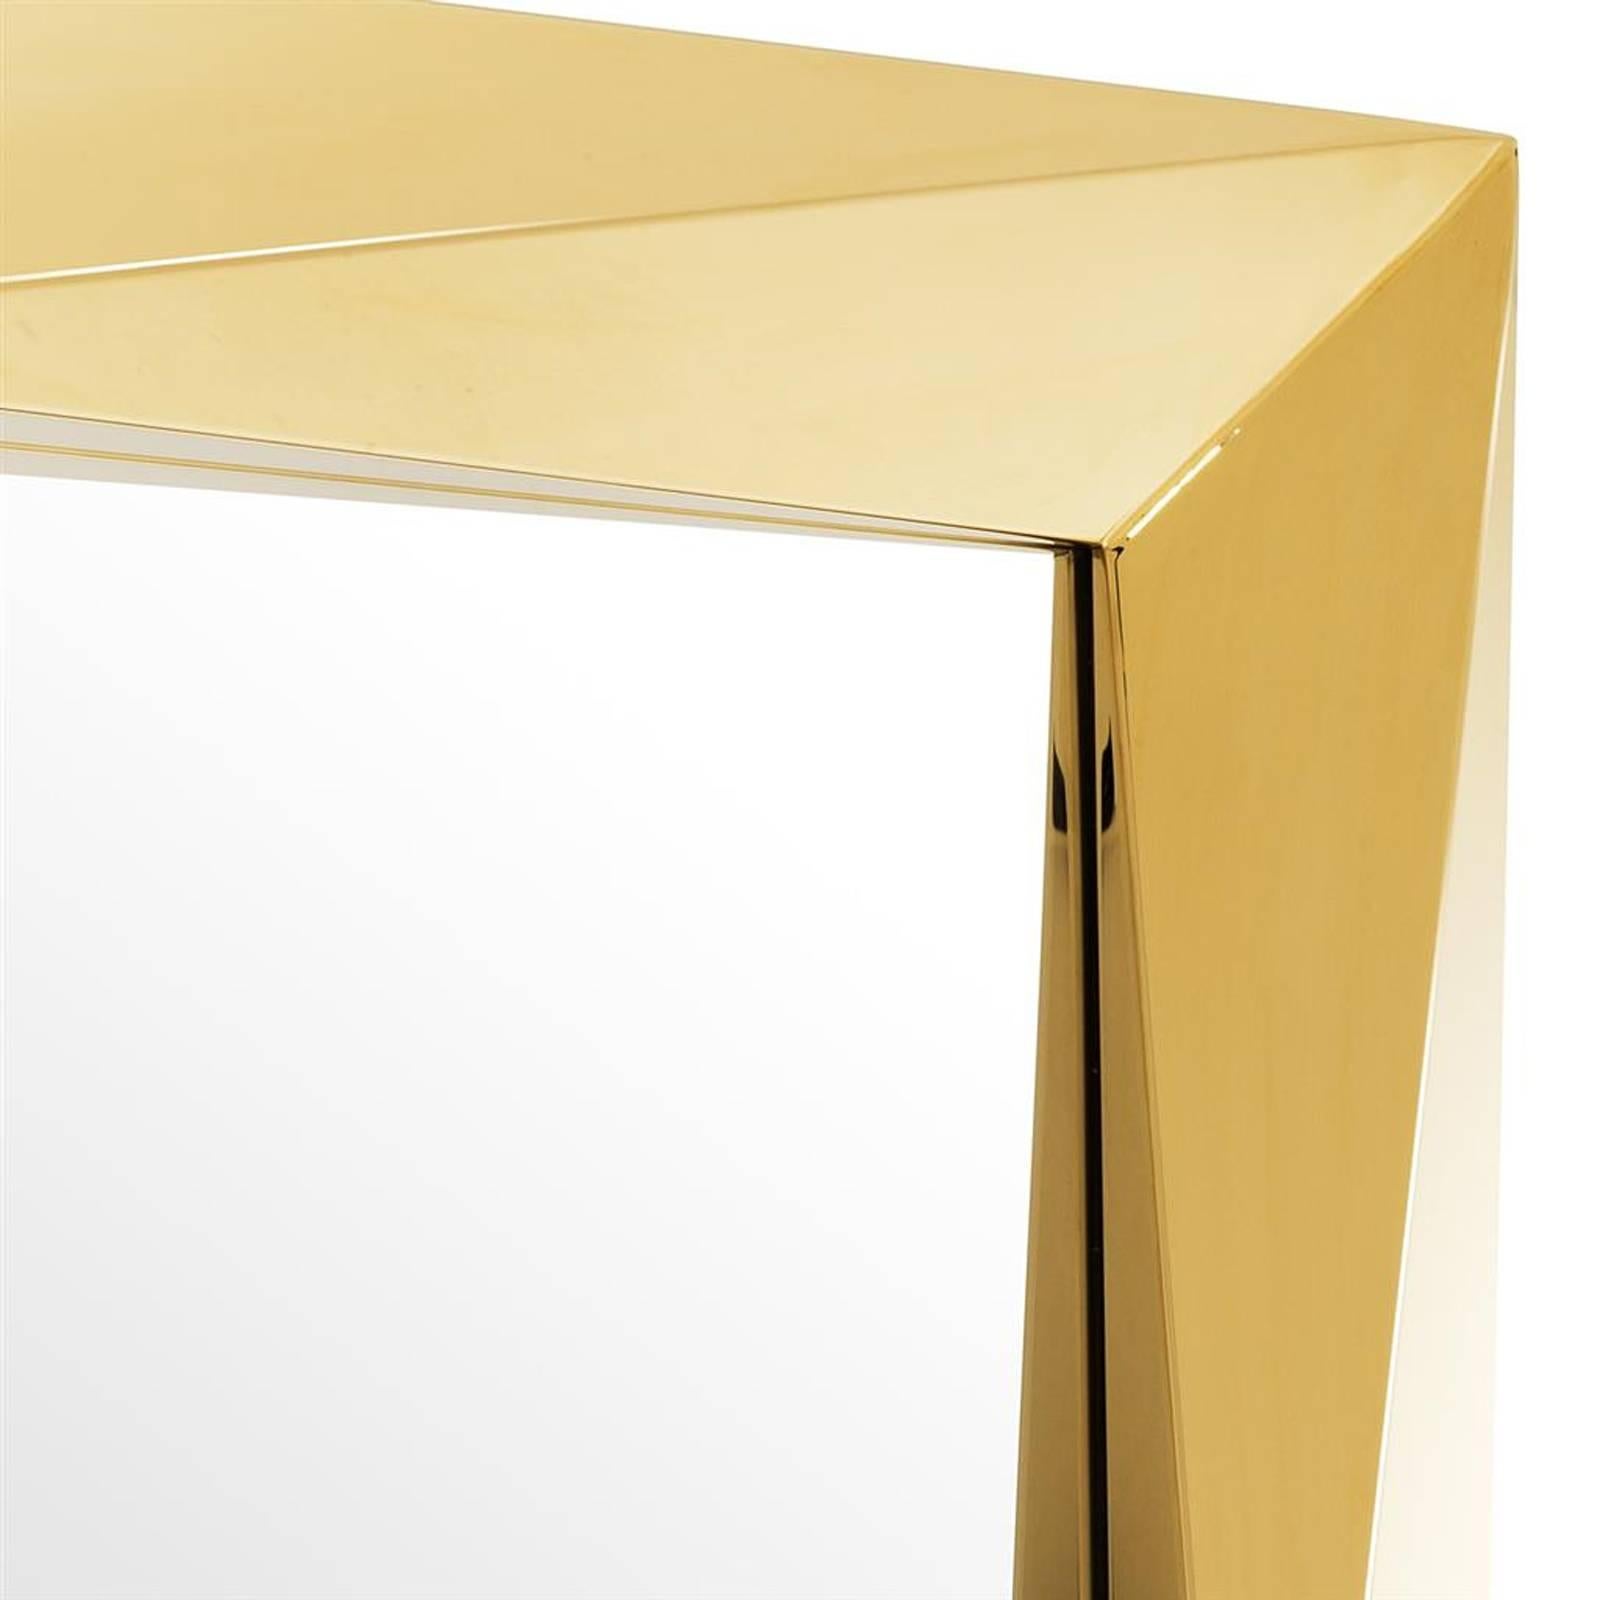 Axis Square Mirror in Gold Finish or in Polished Stainless Steel 1